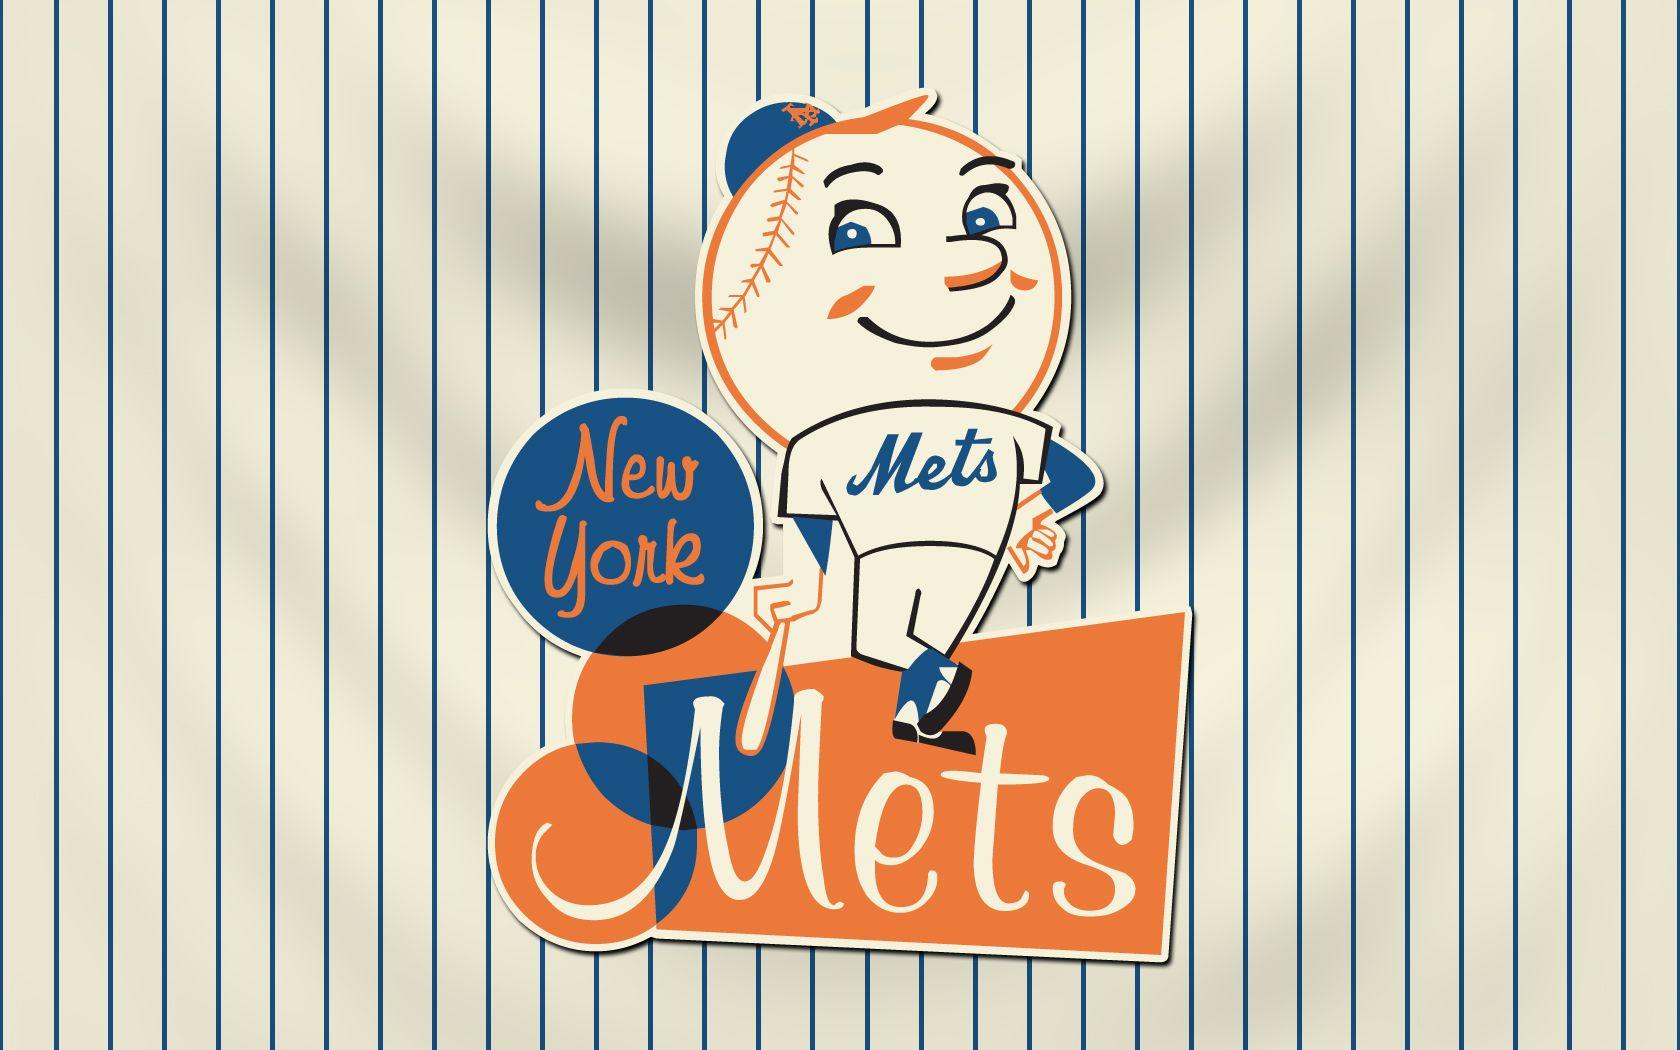 Prove Your Fandom With New York Mets Browser Themes and Wallpaper